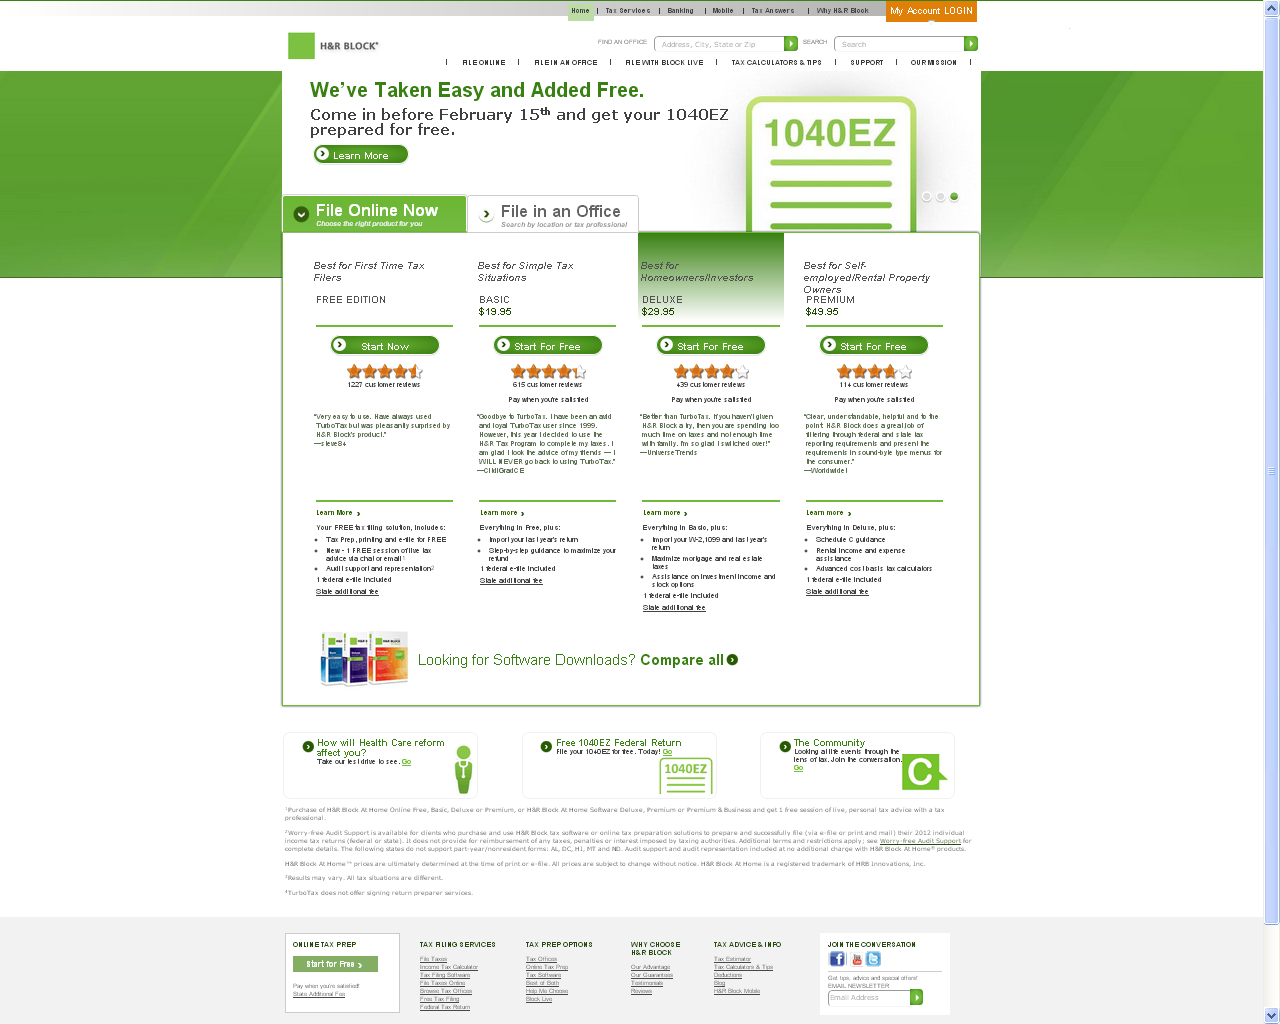 H&R Block for Online Banking